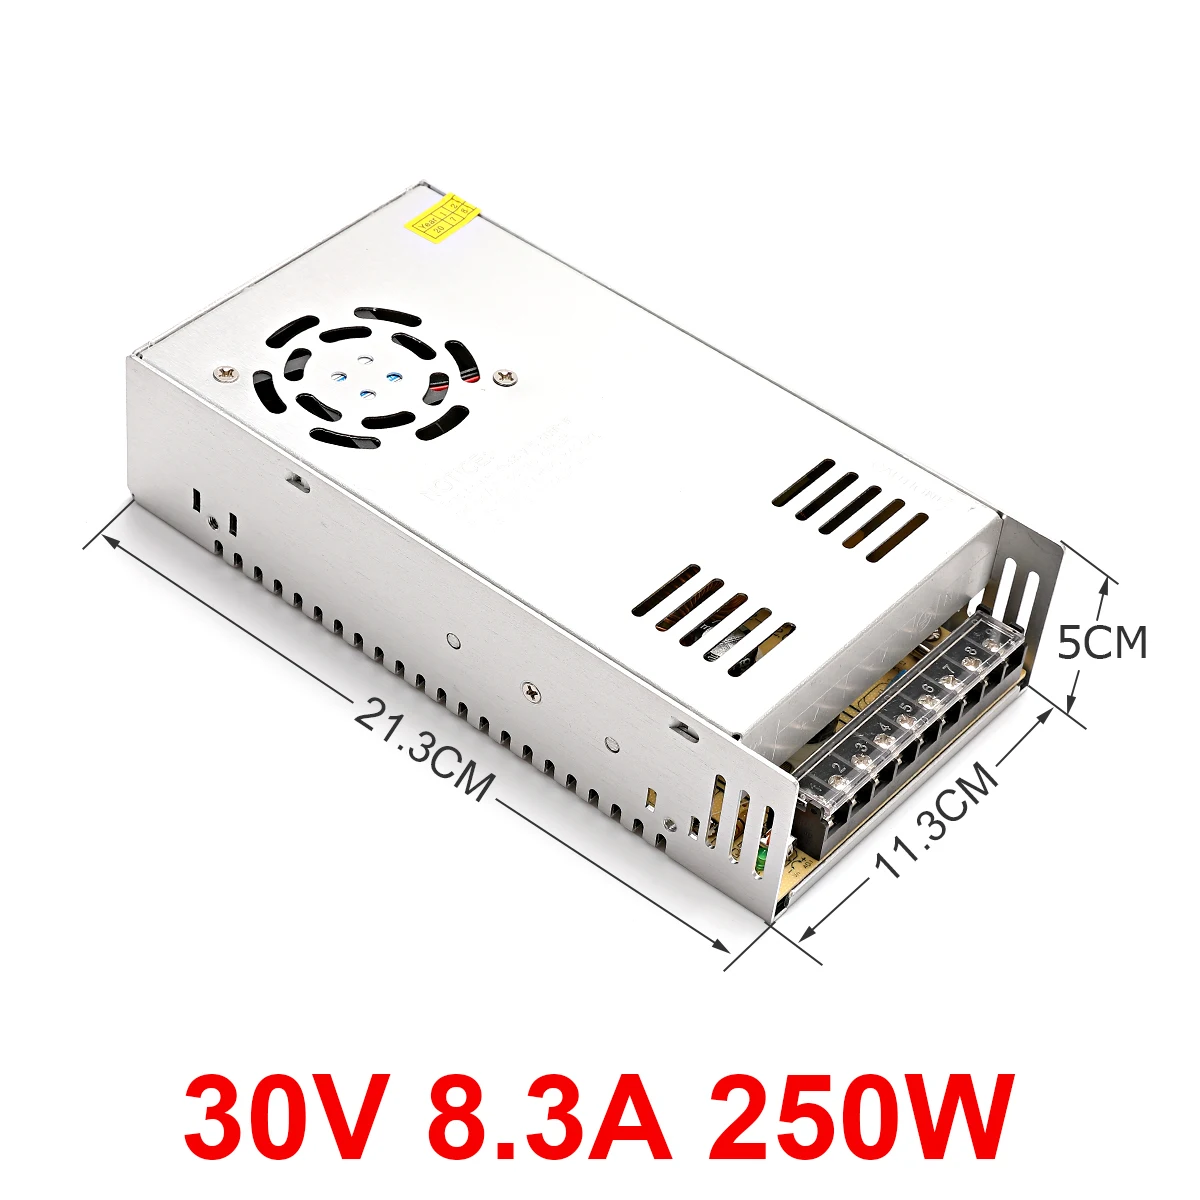 

Switching power supply lamp transformer 30V 8.3A 250W LED strip closed circuit TV adapter